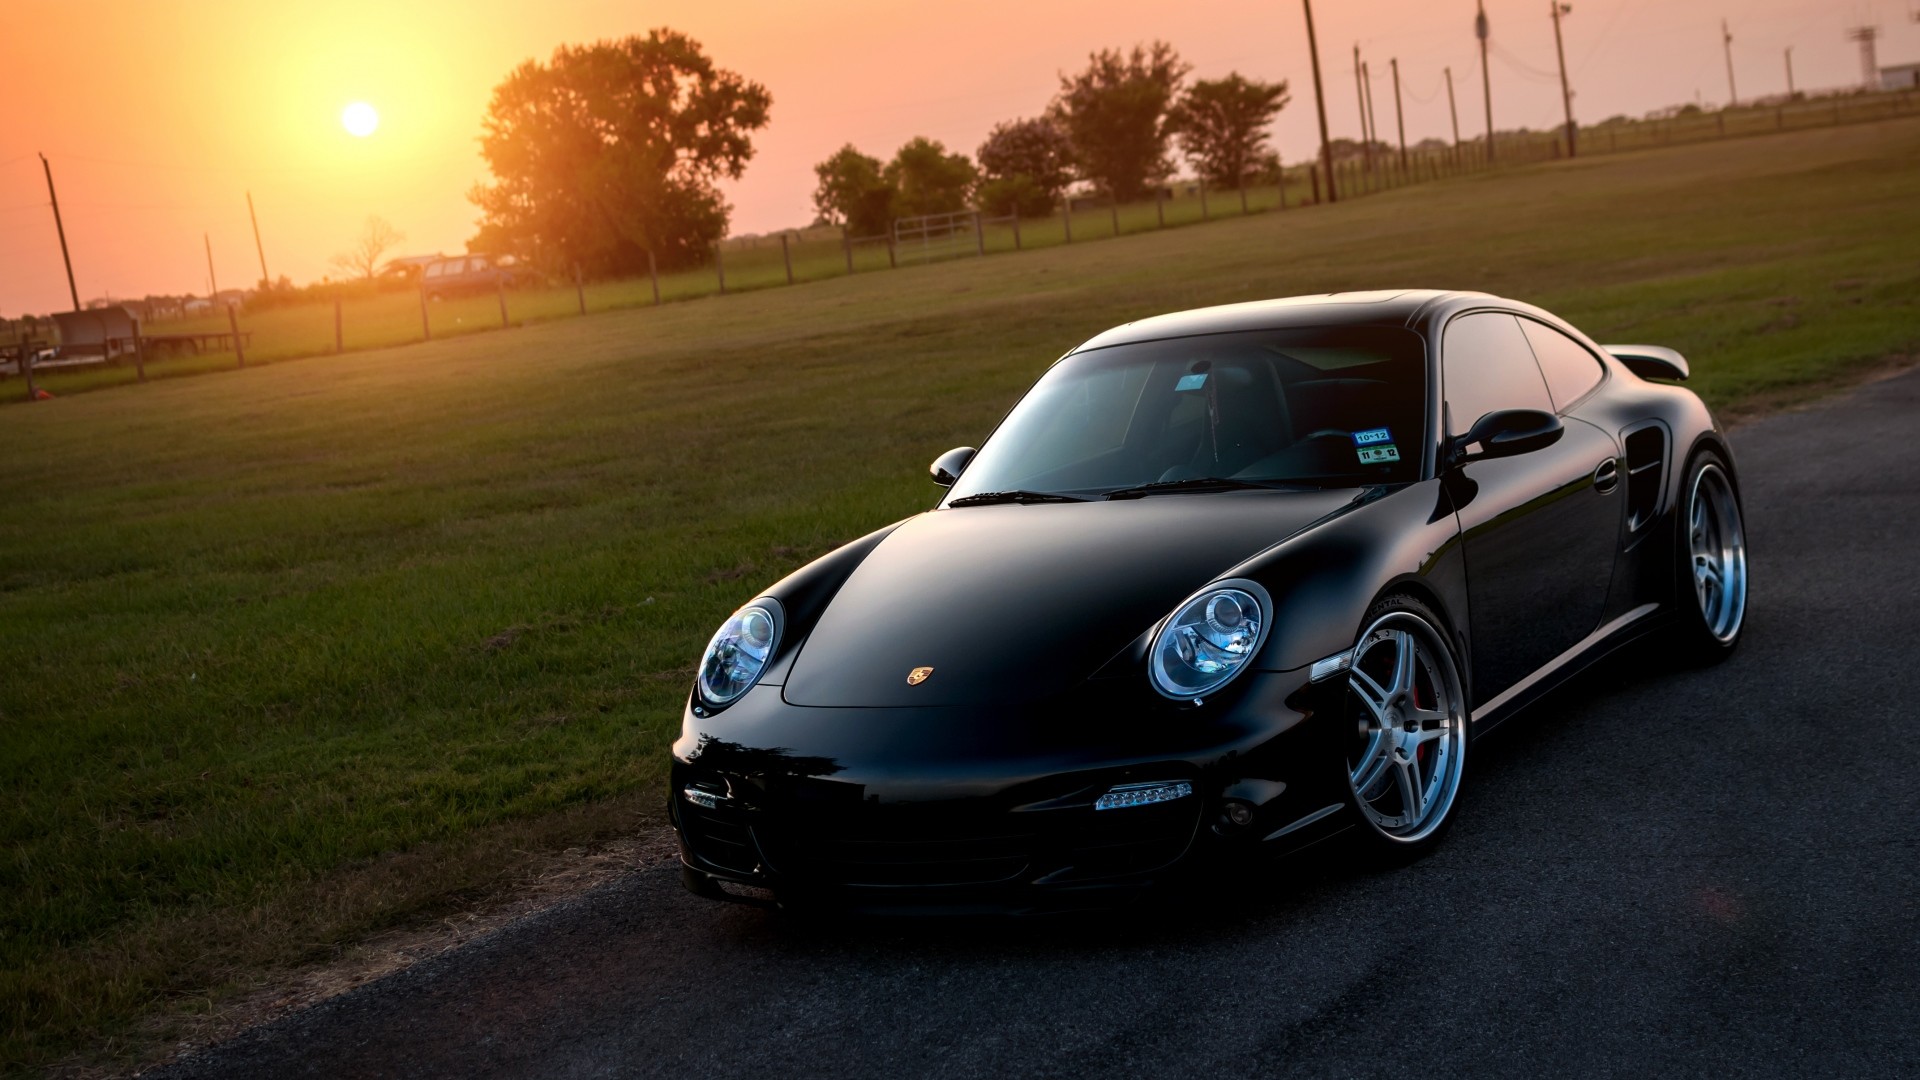 1920x1080 Full HD 1080p Porsche Wallpapers HD, Desktop Backgrounds , Images  and Pictures